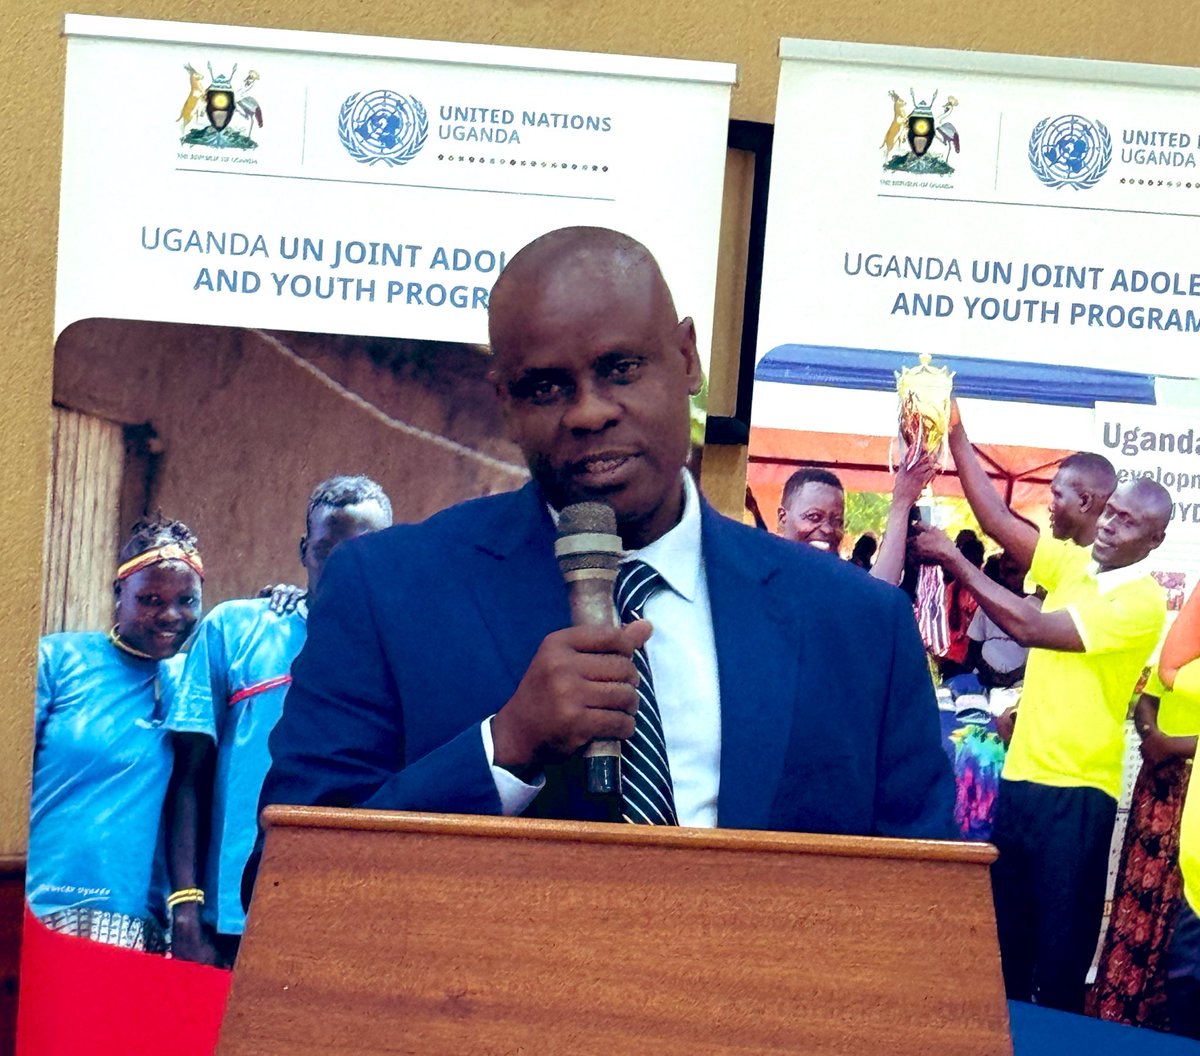 Today @BalaamAteenyiDr committed to supporting the #UNJAYPUganda programme. “Let's make it happen!”💪. He said this during the National Orientation for the A&Y Programme in Entebbe.

We the youth are in safe and blessed hands.